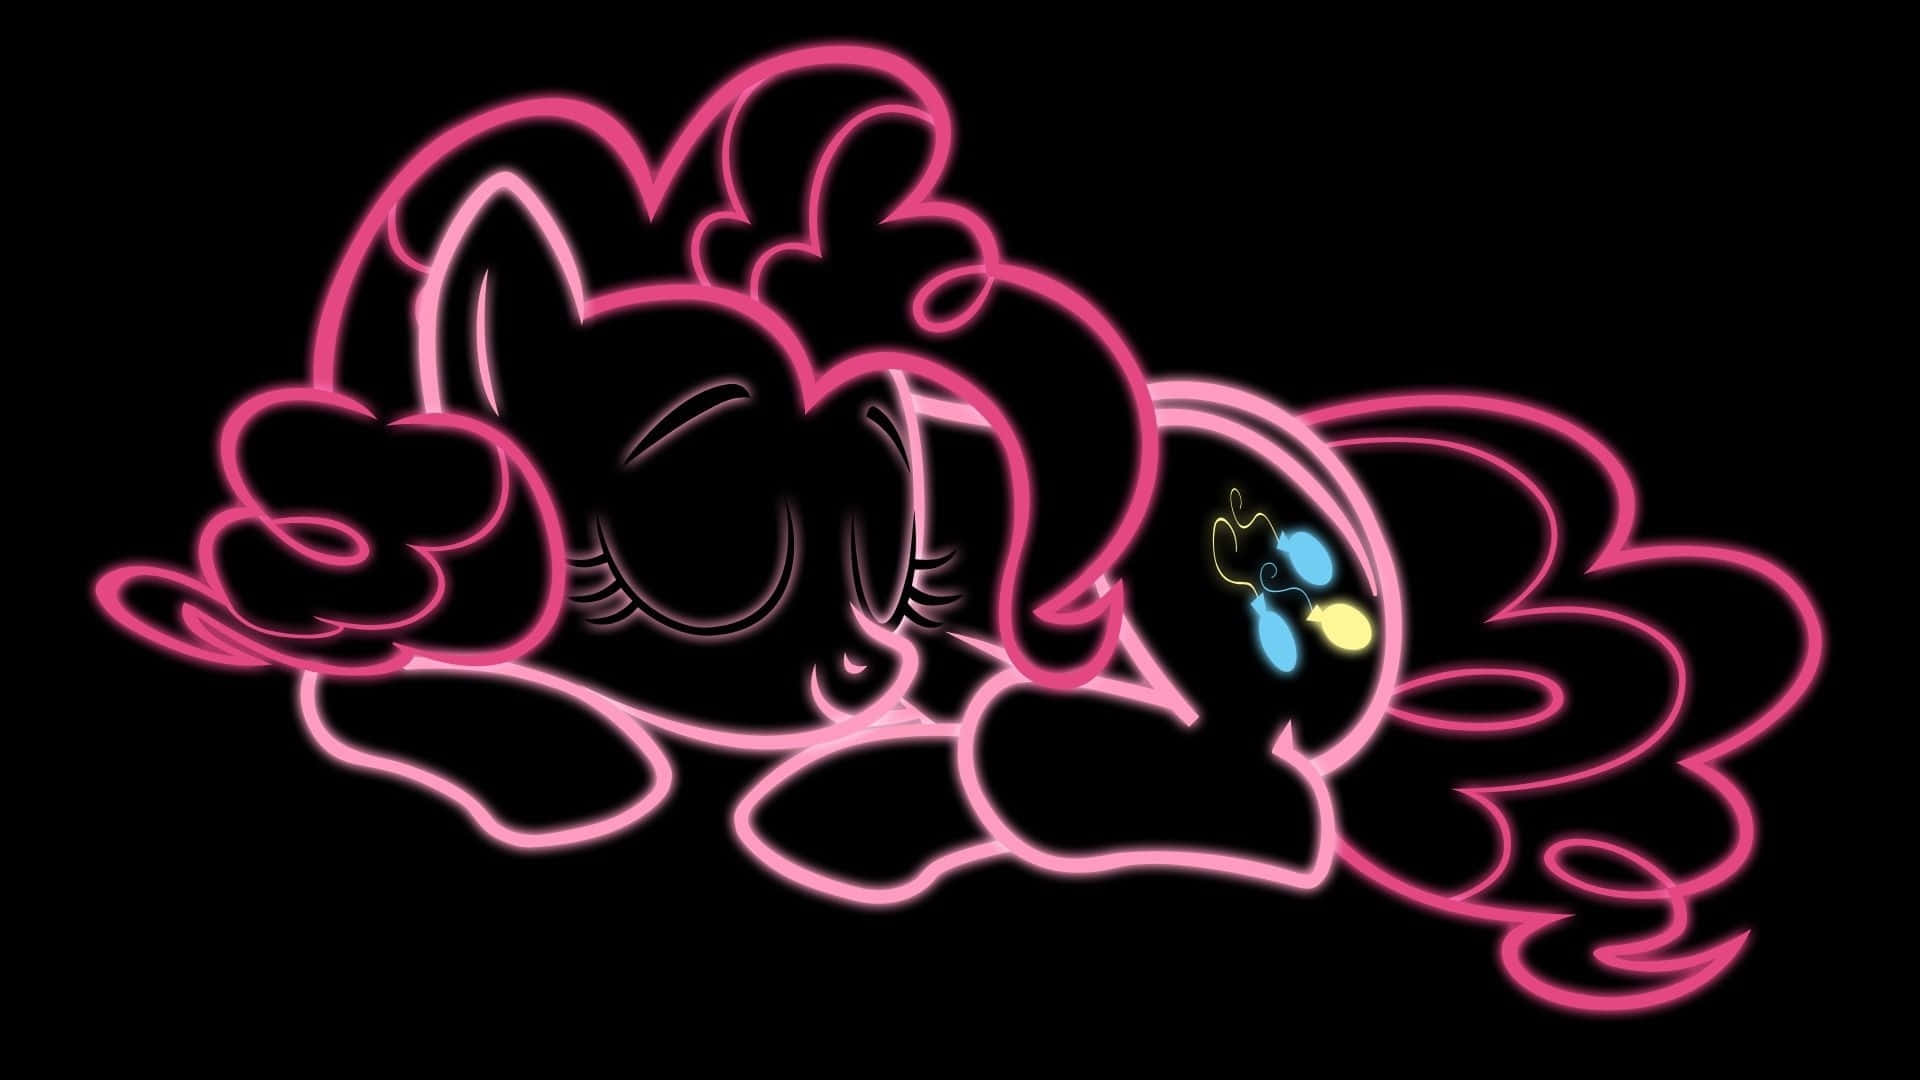 Pinkie Pie singing her heart out